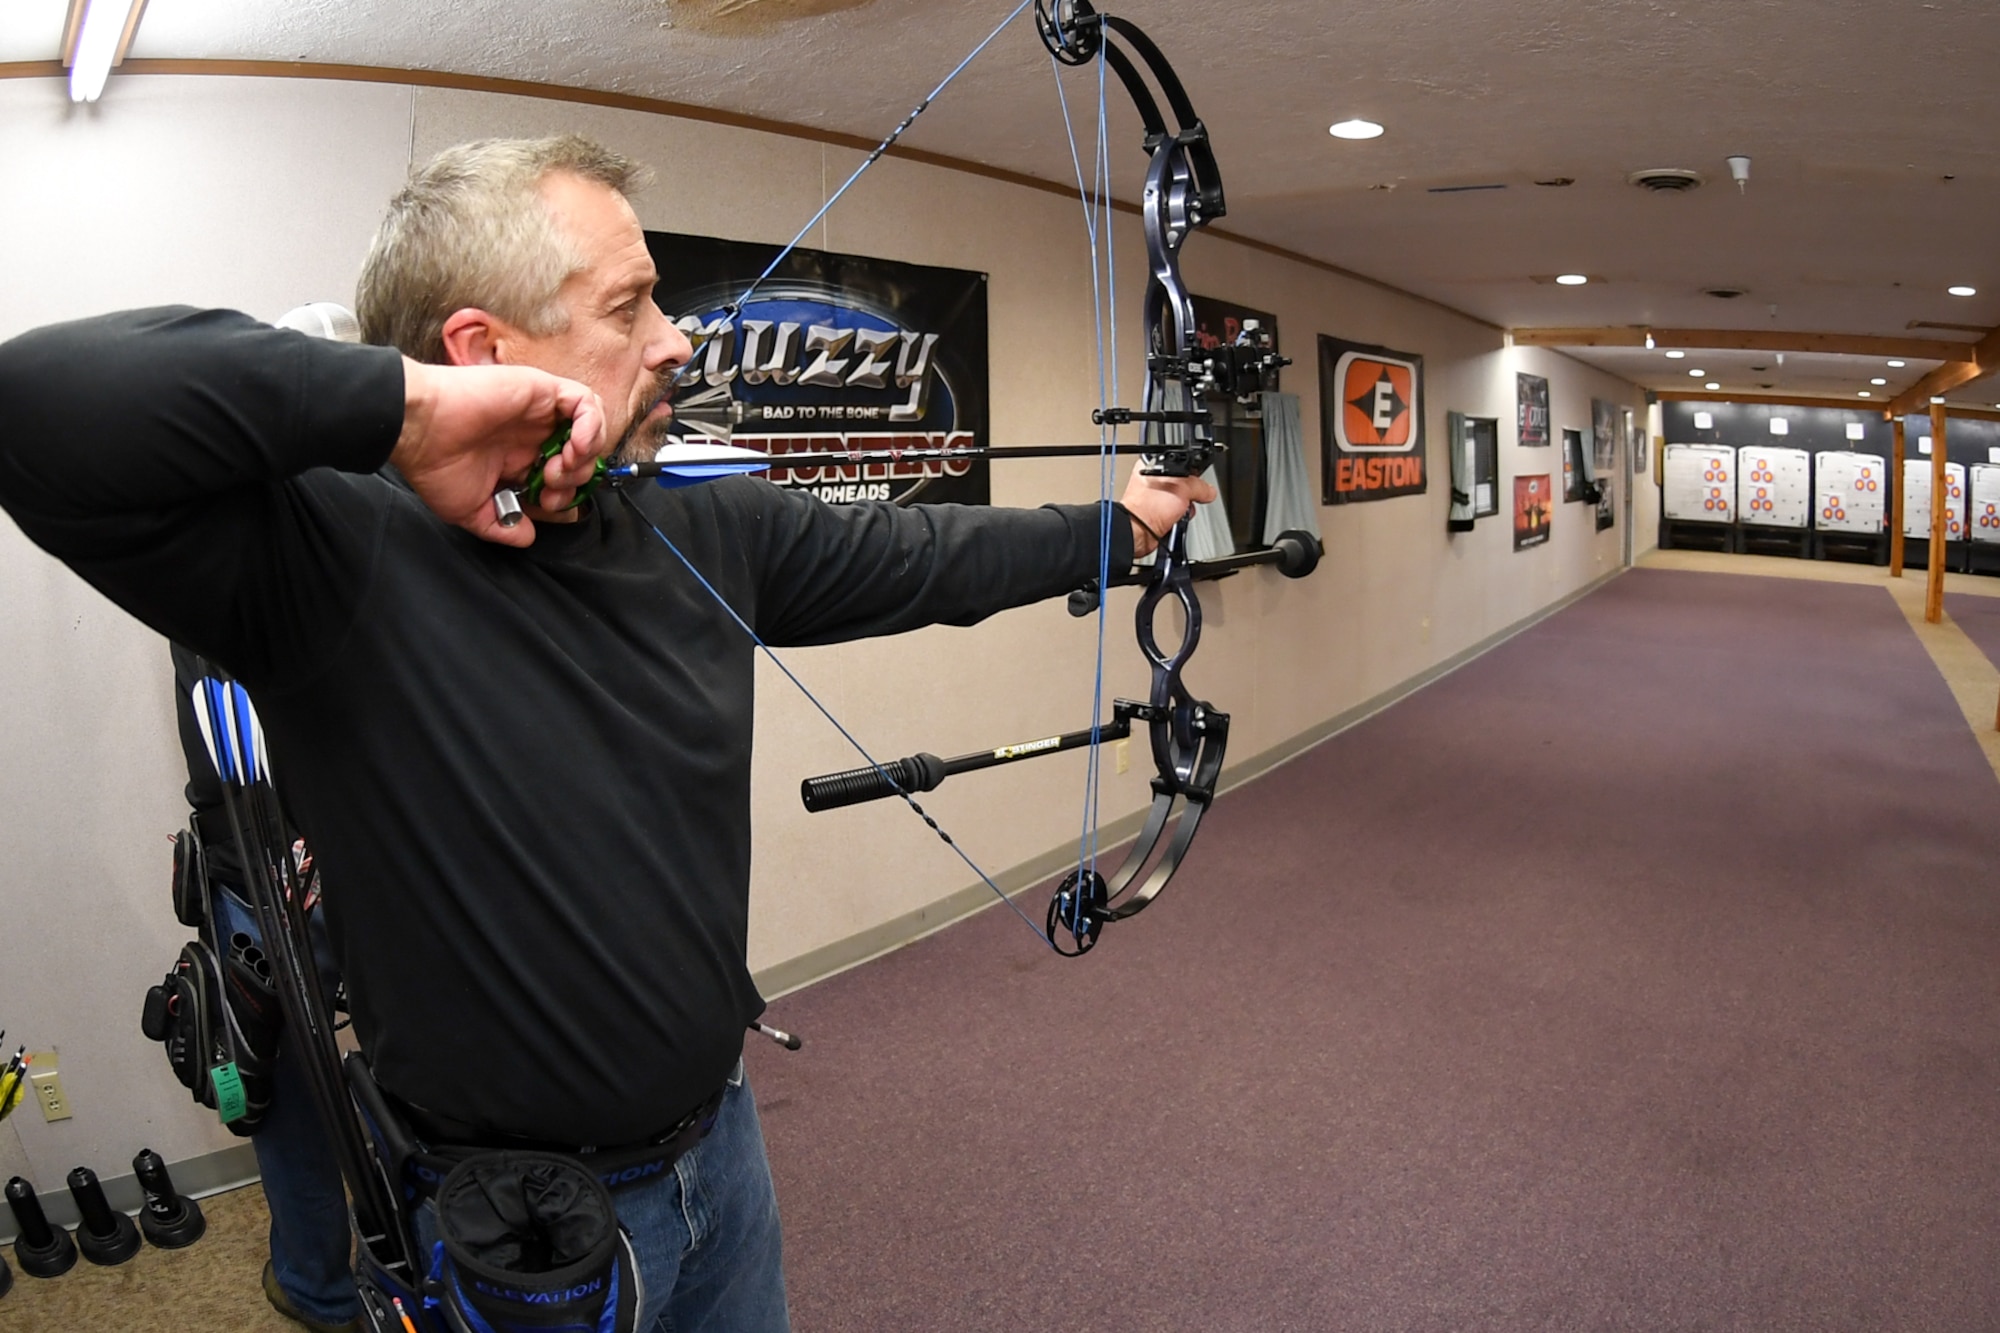 Brian Wade aims his compound bow at a three-spot target during a Hill Archery Club league night Dec. 13, 2018, at Hill Air Force Base, Utah. Besides access to the clubhouse and ranges 24/7, Hill club members are also invited to participate in several archery events throughout the year.  (U.S. Air Force photo by Cynthia Griggs)